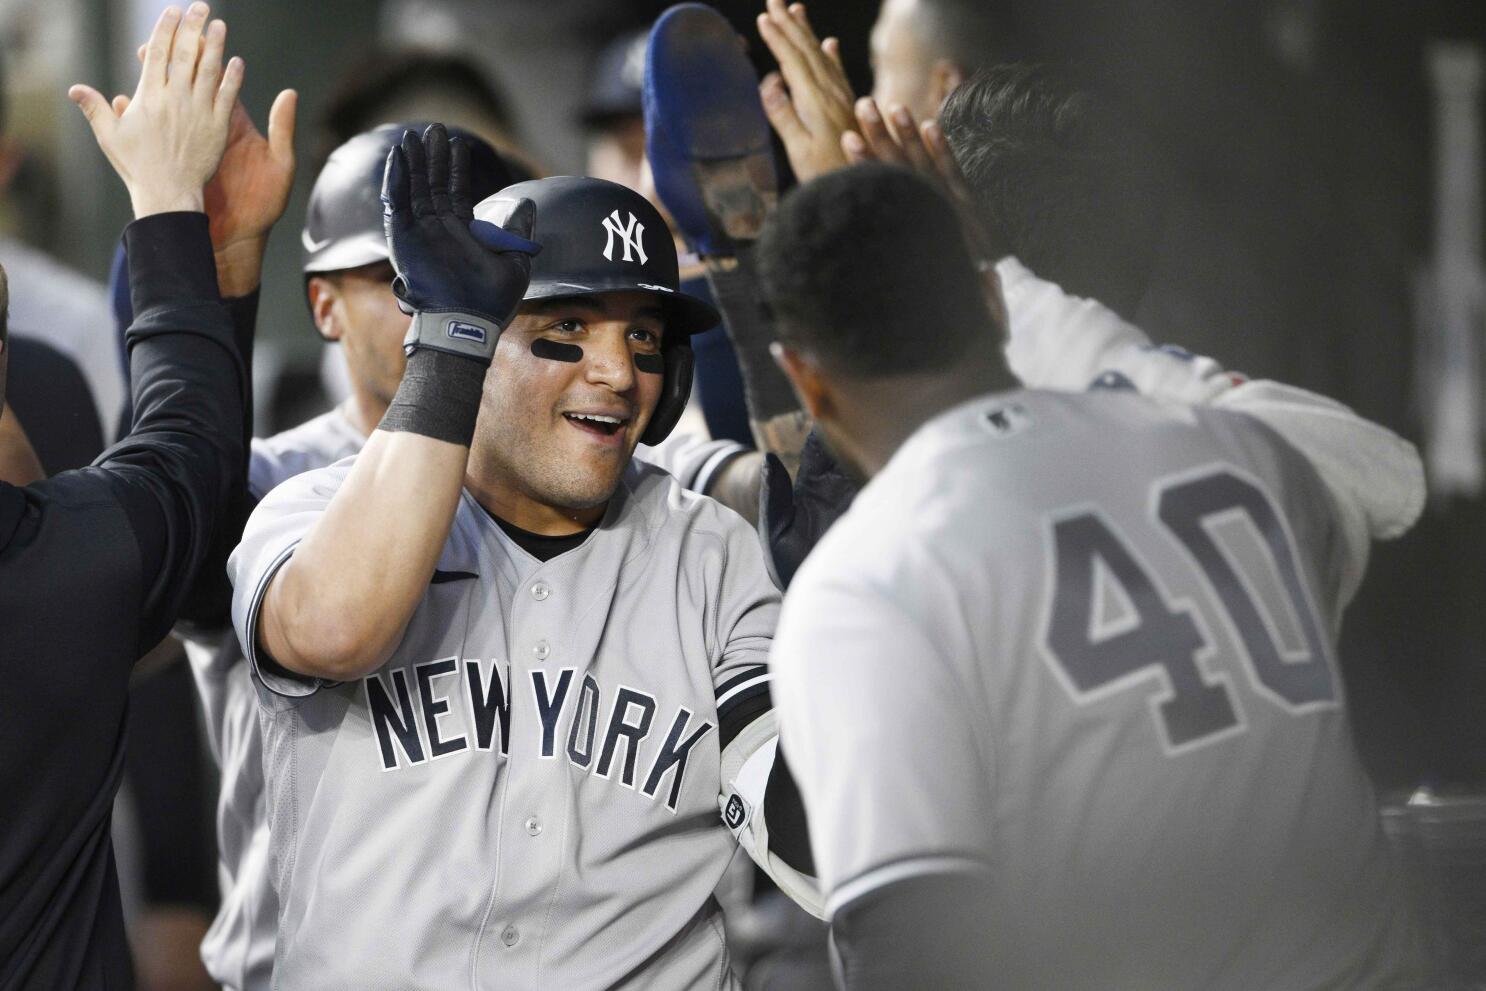 Severino shines as Yanks bash O's for 19th win in 22 games - The